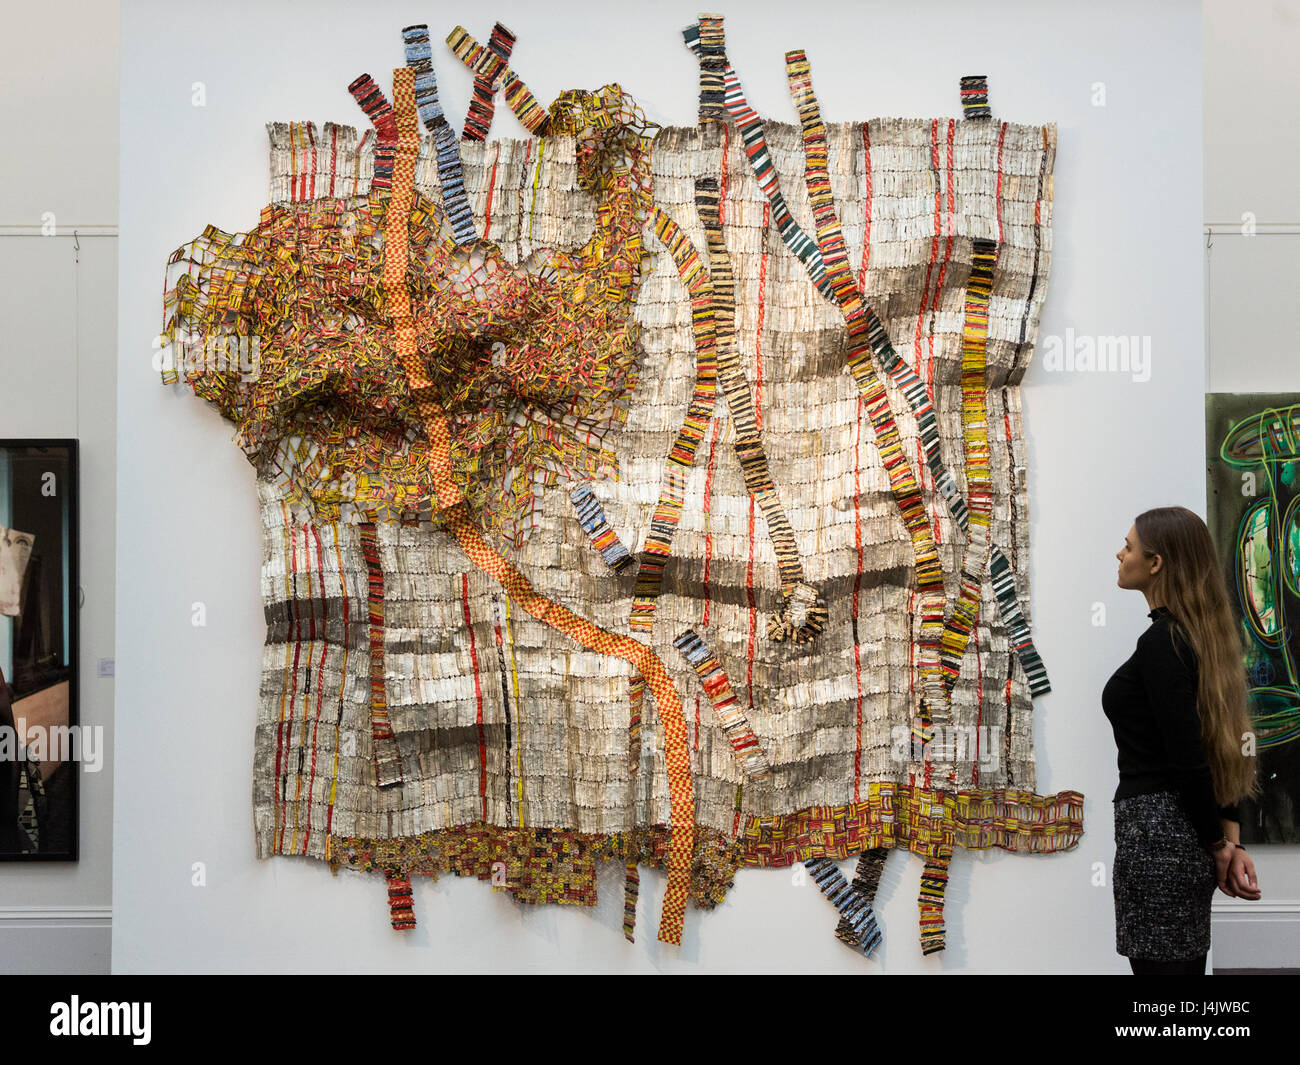 London, UK. 12 May 2017. Earth Developing More Roots, 2011, by artist El Anatsui from Ghana, est GBP 650,000-850,000. Sotheby’s unveils inaugural sale of modern and contemporary African art at its New Bond Street premises. 115 artworks by over 60 different artists from 14 countries across the continent are on display until the sale on 16 May 2017. Stock Photo